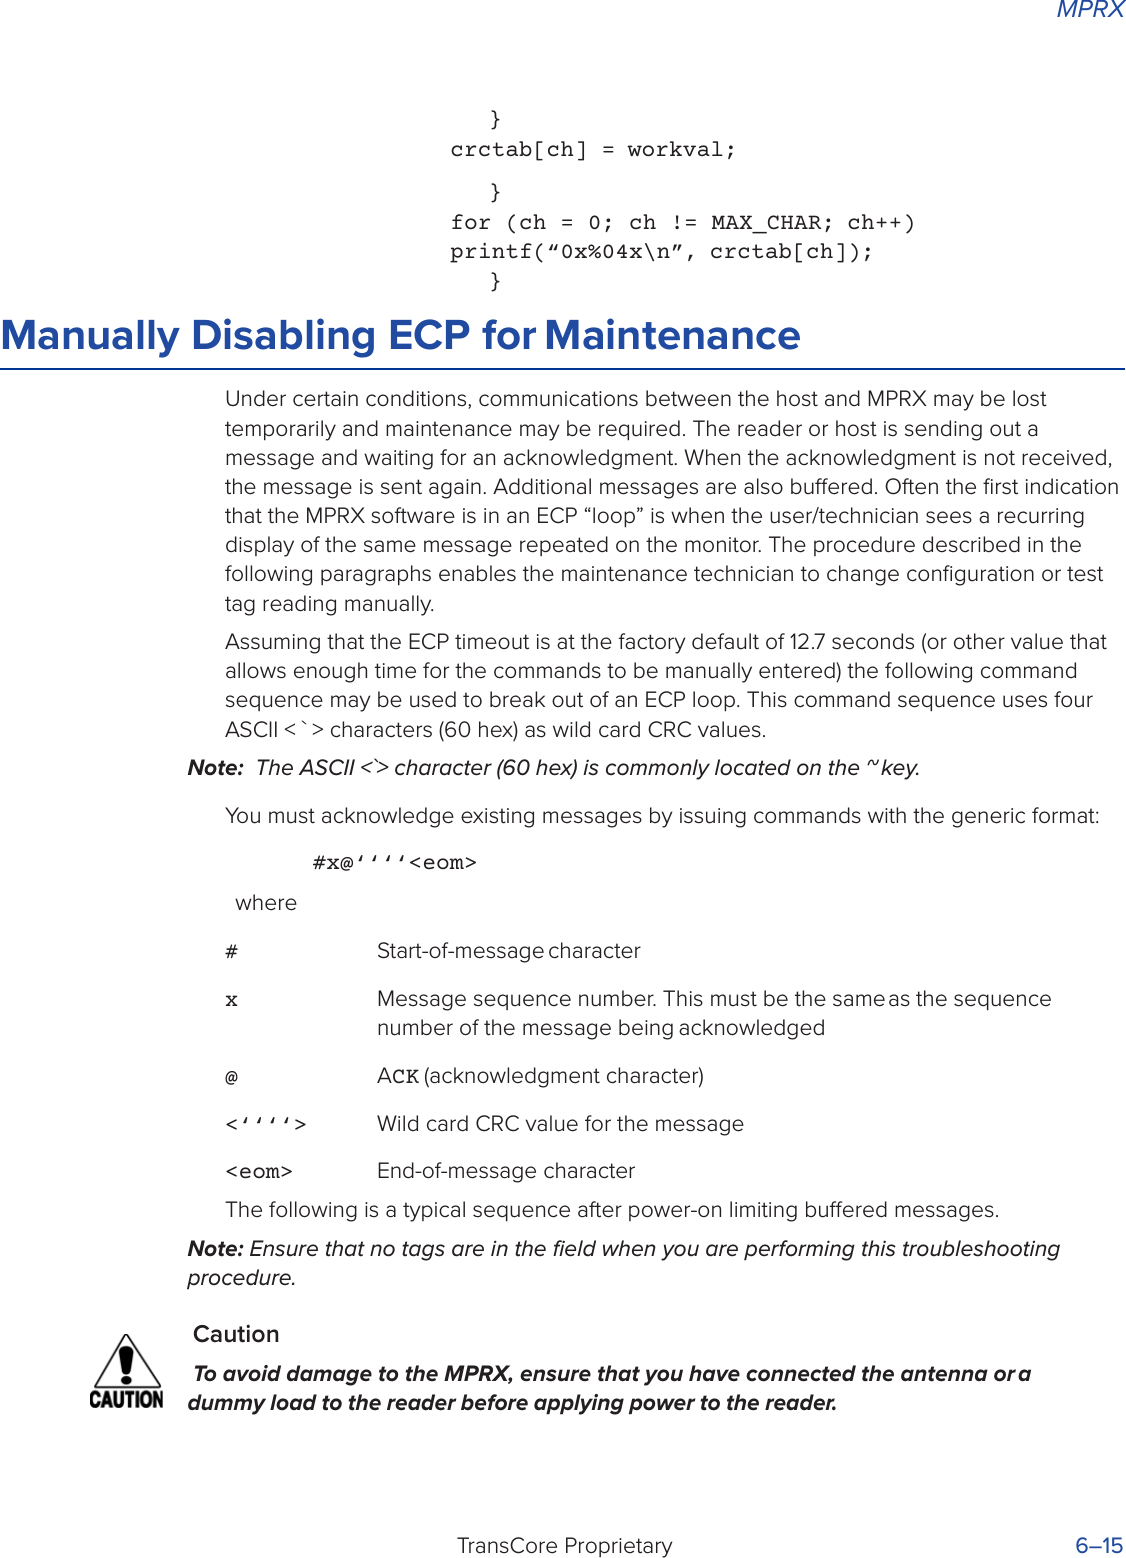 MPRXTransCore Proprietary 6–15}crctab[ch] = workval;}for (ch = 0; ch != MAX_CHAR; ch++) printf(“0x%04x\n”, crctab[ch]);}Manually Disabling ECP for MaintenanceUnder certain conditions, communications between the host and MPRX may be lost temporarily and maintenance may be required. The reader or host is sending out a message and waiting for an acknowledgment. When the acknowledgment is not received, the message is sent again. Additional messages are also buered. Often the ﬁrst indication that the MPRX software is in an ECP “loop” is when the user/technician sees a recurring display of the same message repeated on the monitor. The procedure described in the following paragraphs enables the maintenance technician to change conﬁguration or test tag reading manually.Assuming that the ECP timeout is at the factory default of 12.7 seconds (or other value that allows enough time for the commands to be manually entered) the following command sequence may be used to break out of an ECP loop. This command sequence uses four ASCII &lt; ` &gt; characters (60 hex) as wild card CRC values.Note:  The ASCII &lt;`&gt; character (60 hex) is commonly located on the ~ key.You must acknowledge existing messages by issuing commands with the generic format:#x@‘‘‘‘&lt;eom&gt;where# Start-of-message characterx Message sequence number. This must be the same as the sequence number of the message being acknowledged@ ACK (acknowledgment character)&lt;‘‘‘‘&gt;  Wild card CRC value for the message&lt;eom&gt;  End-of-message characterThe following is a typical sequence after power-on limiting buered messages.Note: Ensure that no tags are in the ﬁeld when you are performing this troubleshooting procedure.CautionTo avoid damage to the MPRX, ensure that you have connected the antenna or a dummy load to the reader before applying power to the reader.